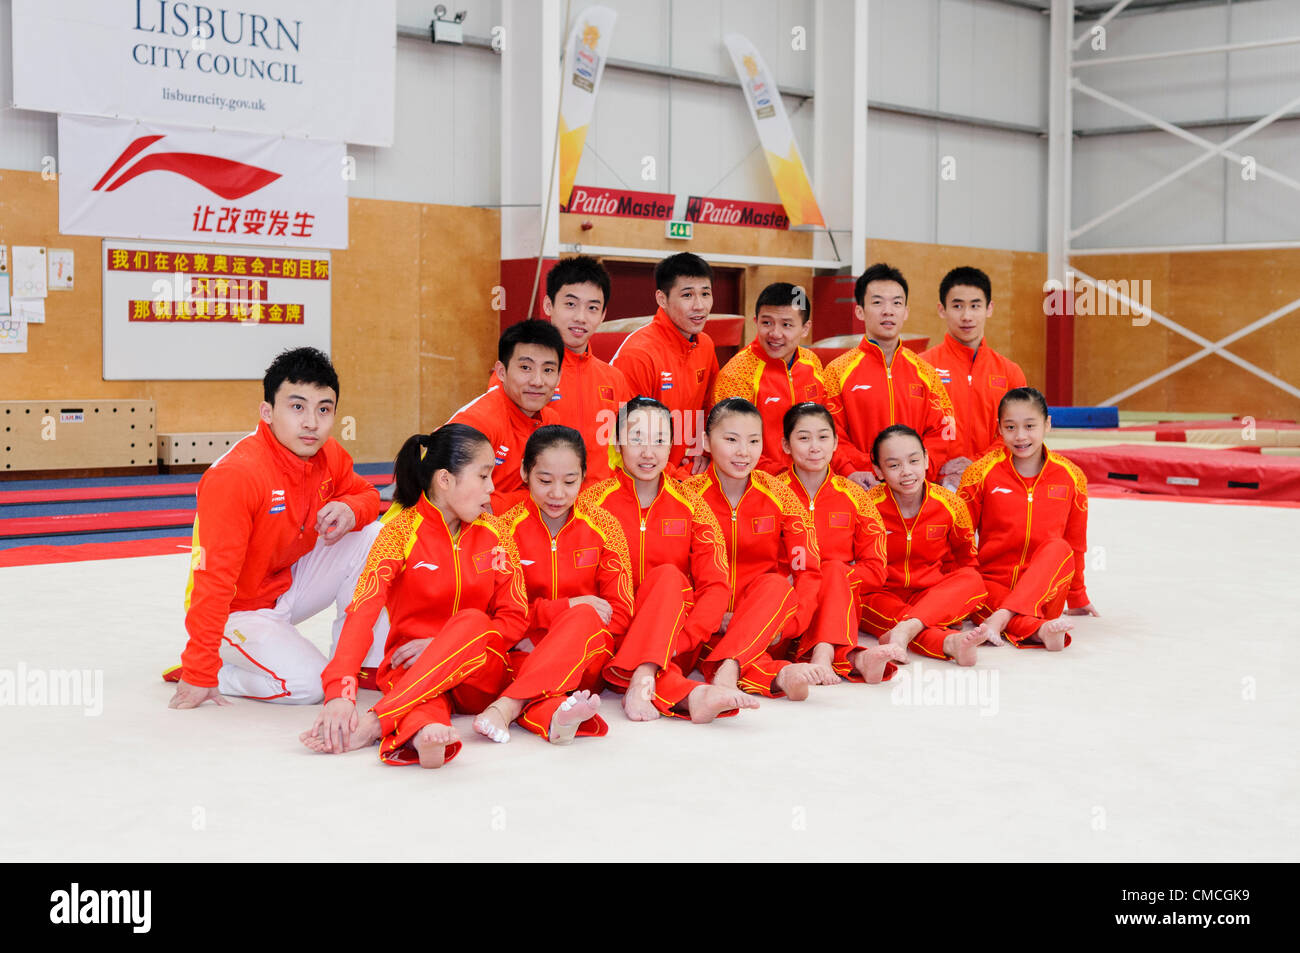 Lisburn, 18/07/2012 - Chinese gymnastic team for London 2012 Olympic games in Lisburn, Northern Ireland Stock Photo